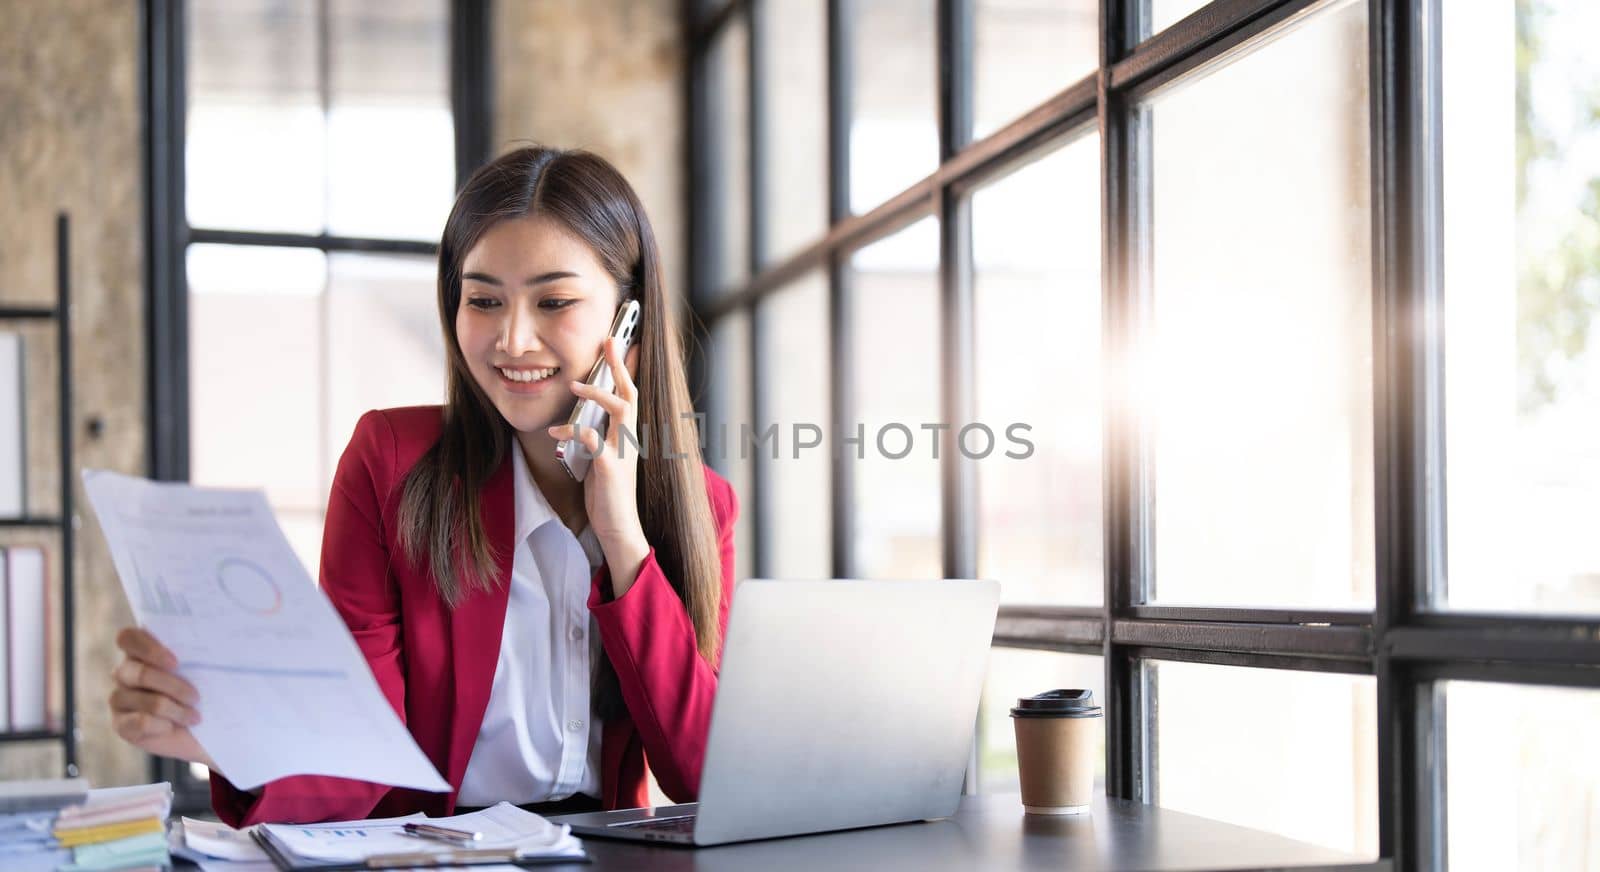 Portrait of a cheerful young business Asian woman using smartphone application in workplace office, concept of Small business employee freelance online sme marketing e-commerce telemarketing. by wichayada